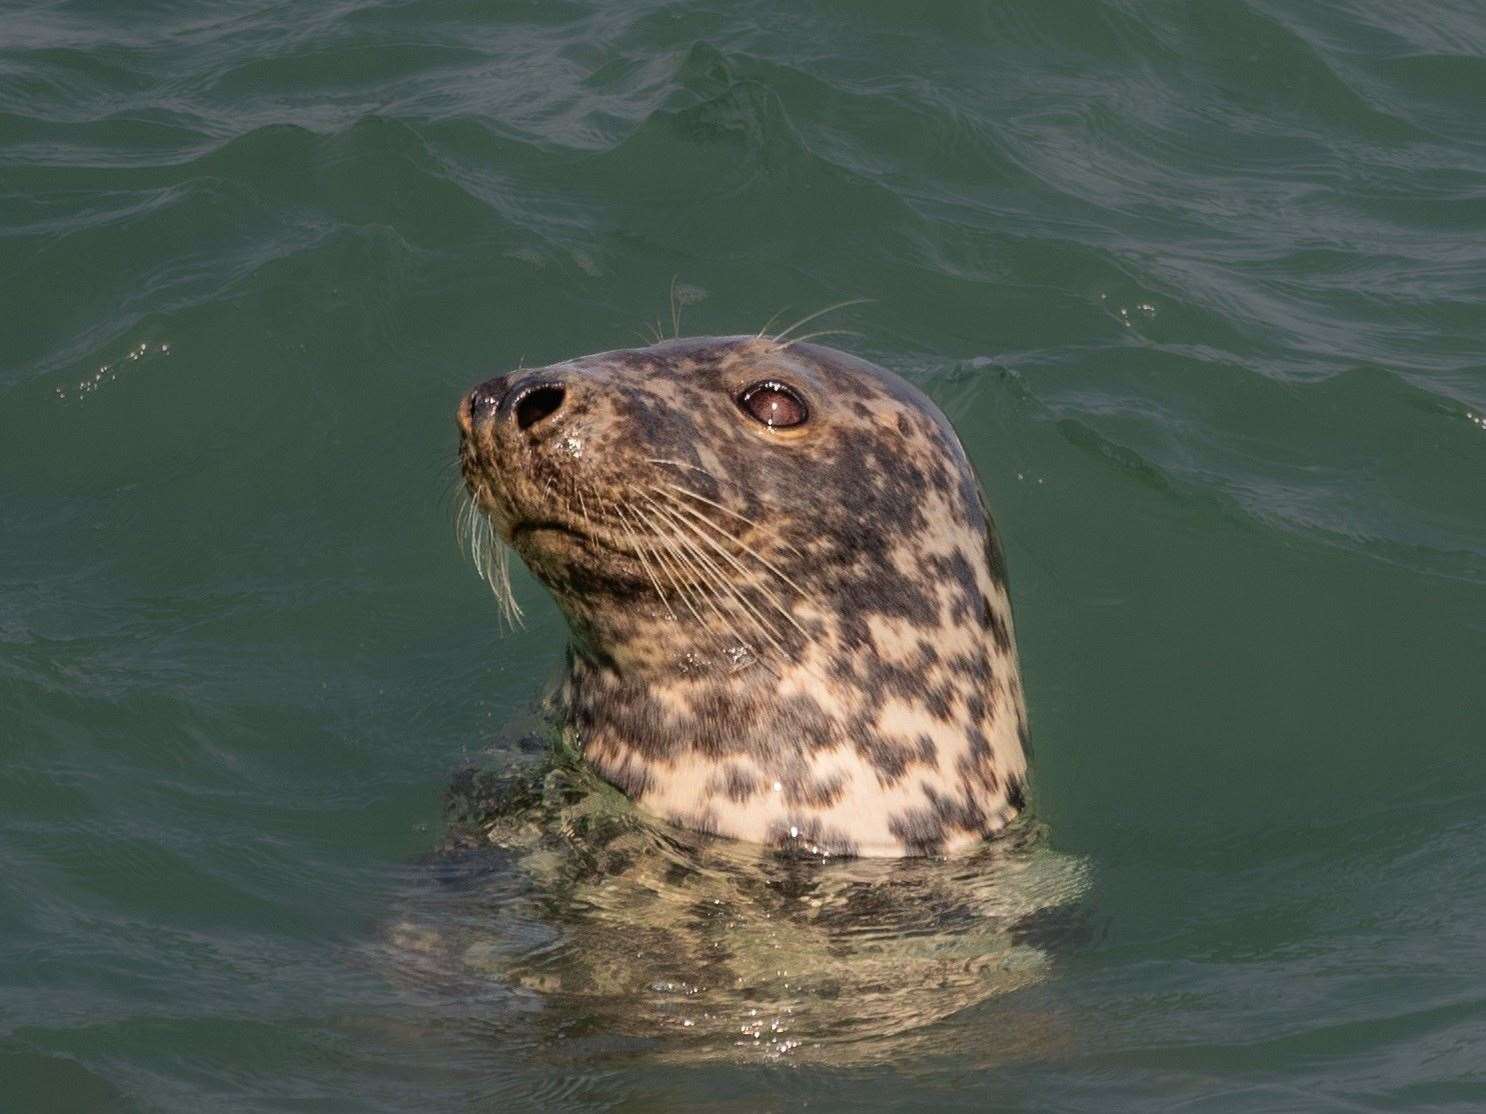 Miss Read caught this stunning picture of a seal at Folkestone earlier this month